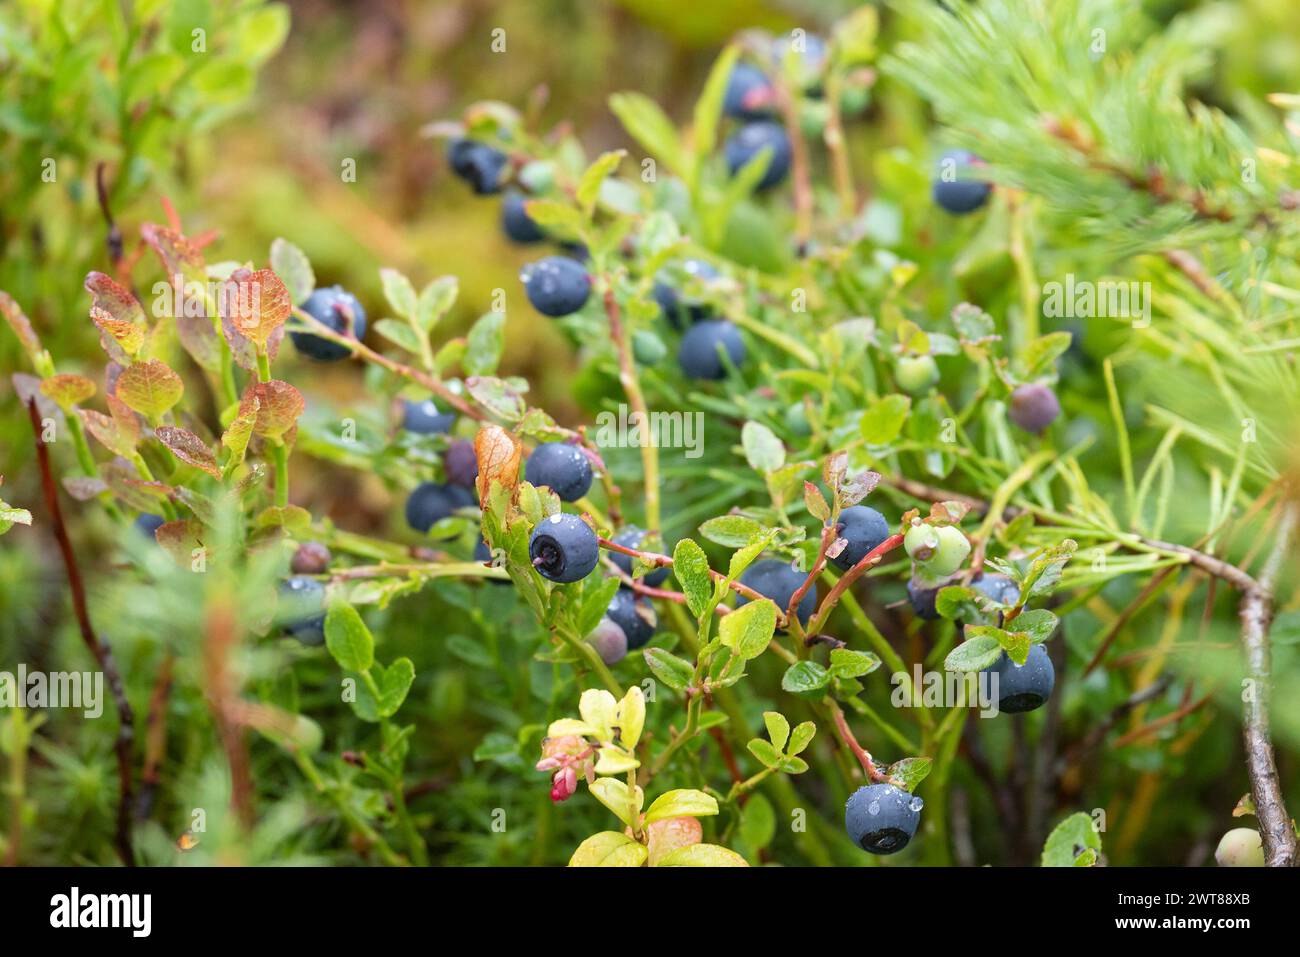 Blueberry bush with ripe berries close up Stock Photo